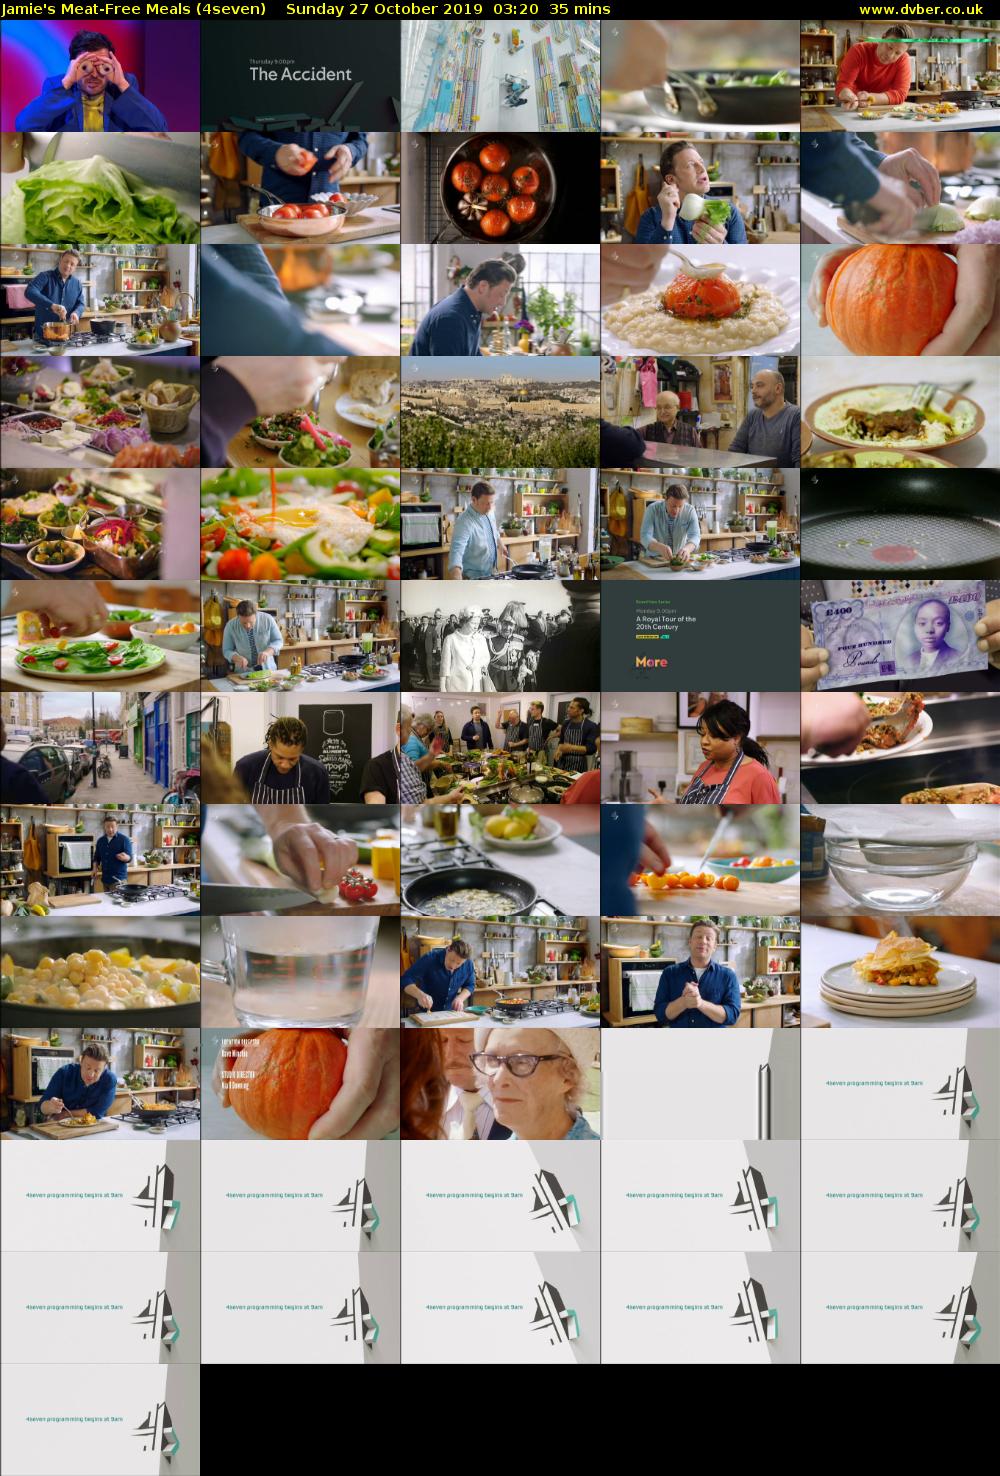 Jamie's Meat-Free Meals (4seven) Sunday 27 October 2019 03:20 - 03:55